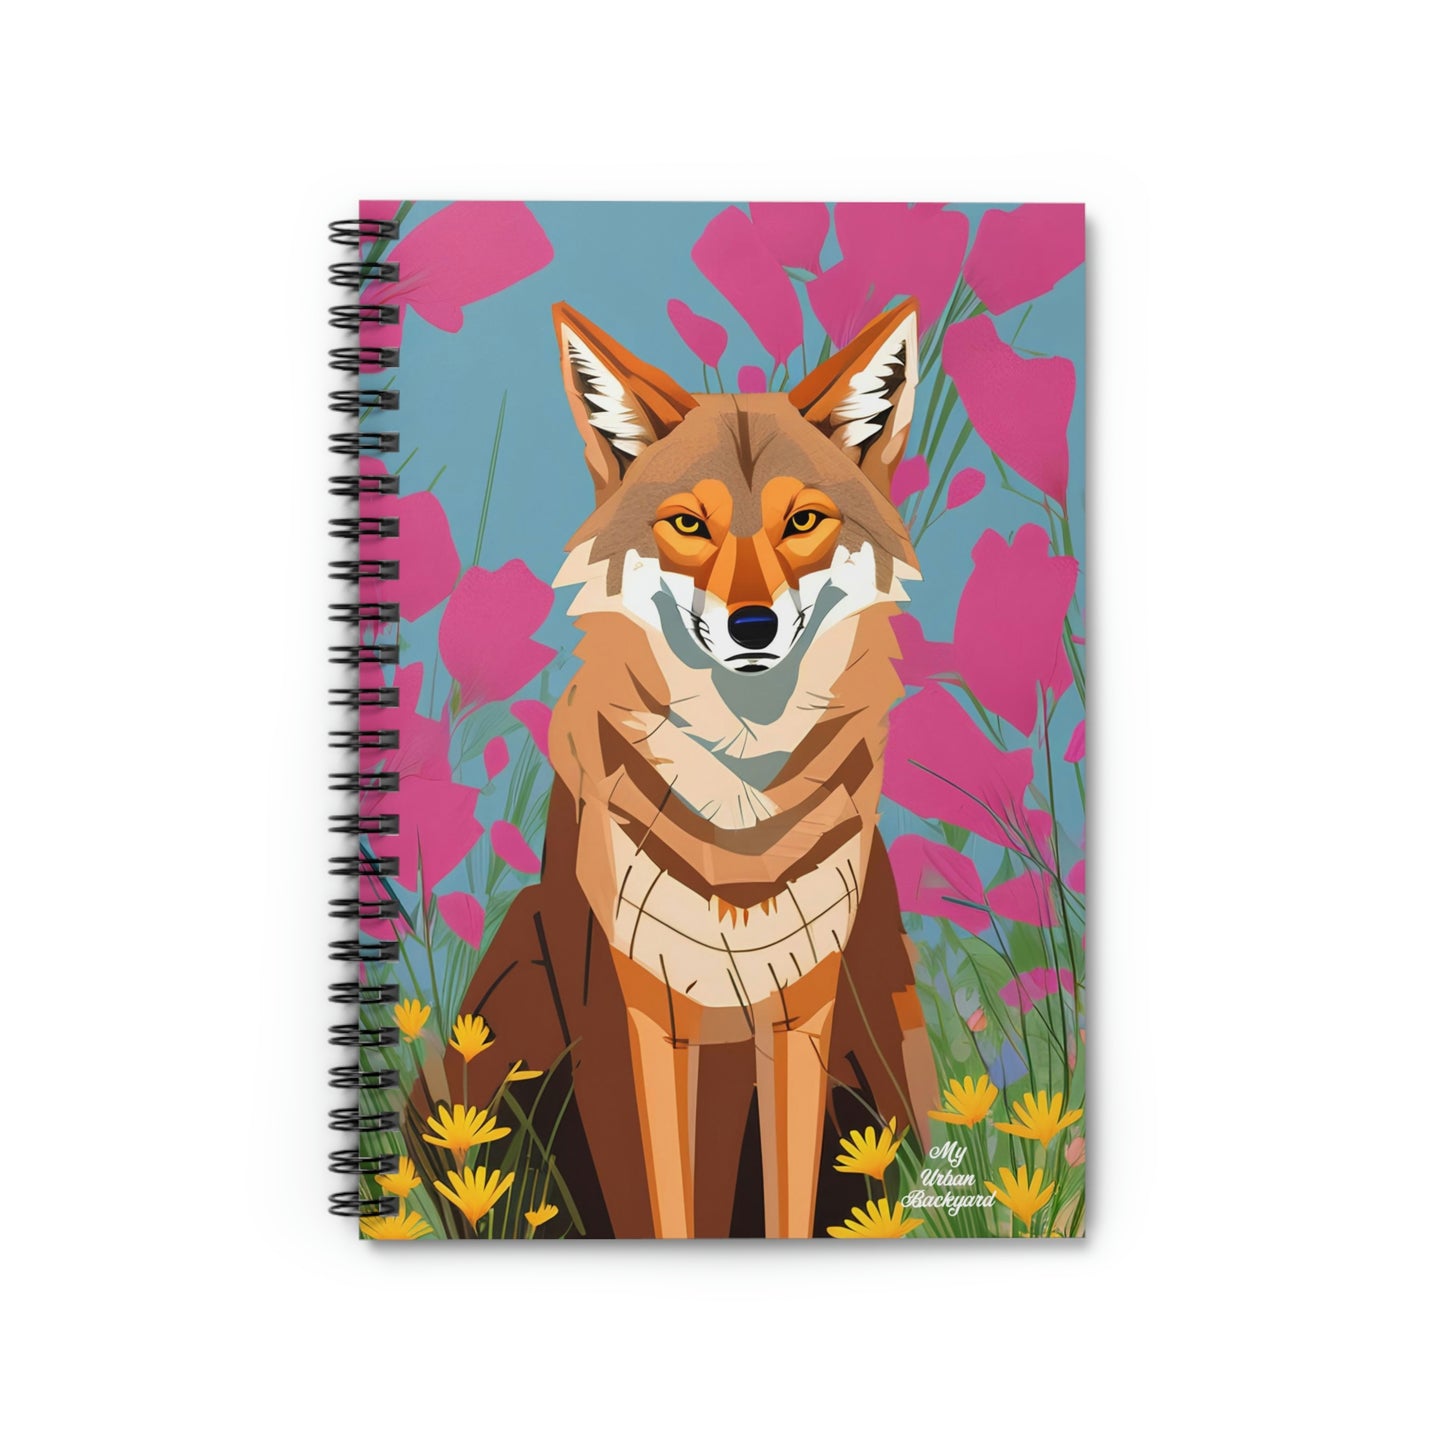 Coyote and Pink Flowers, Spiral Notebook Journal - Write in Style